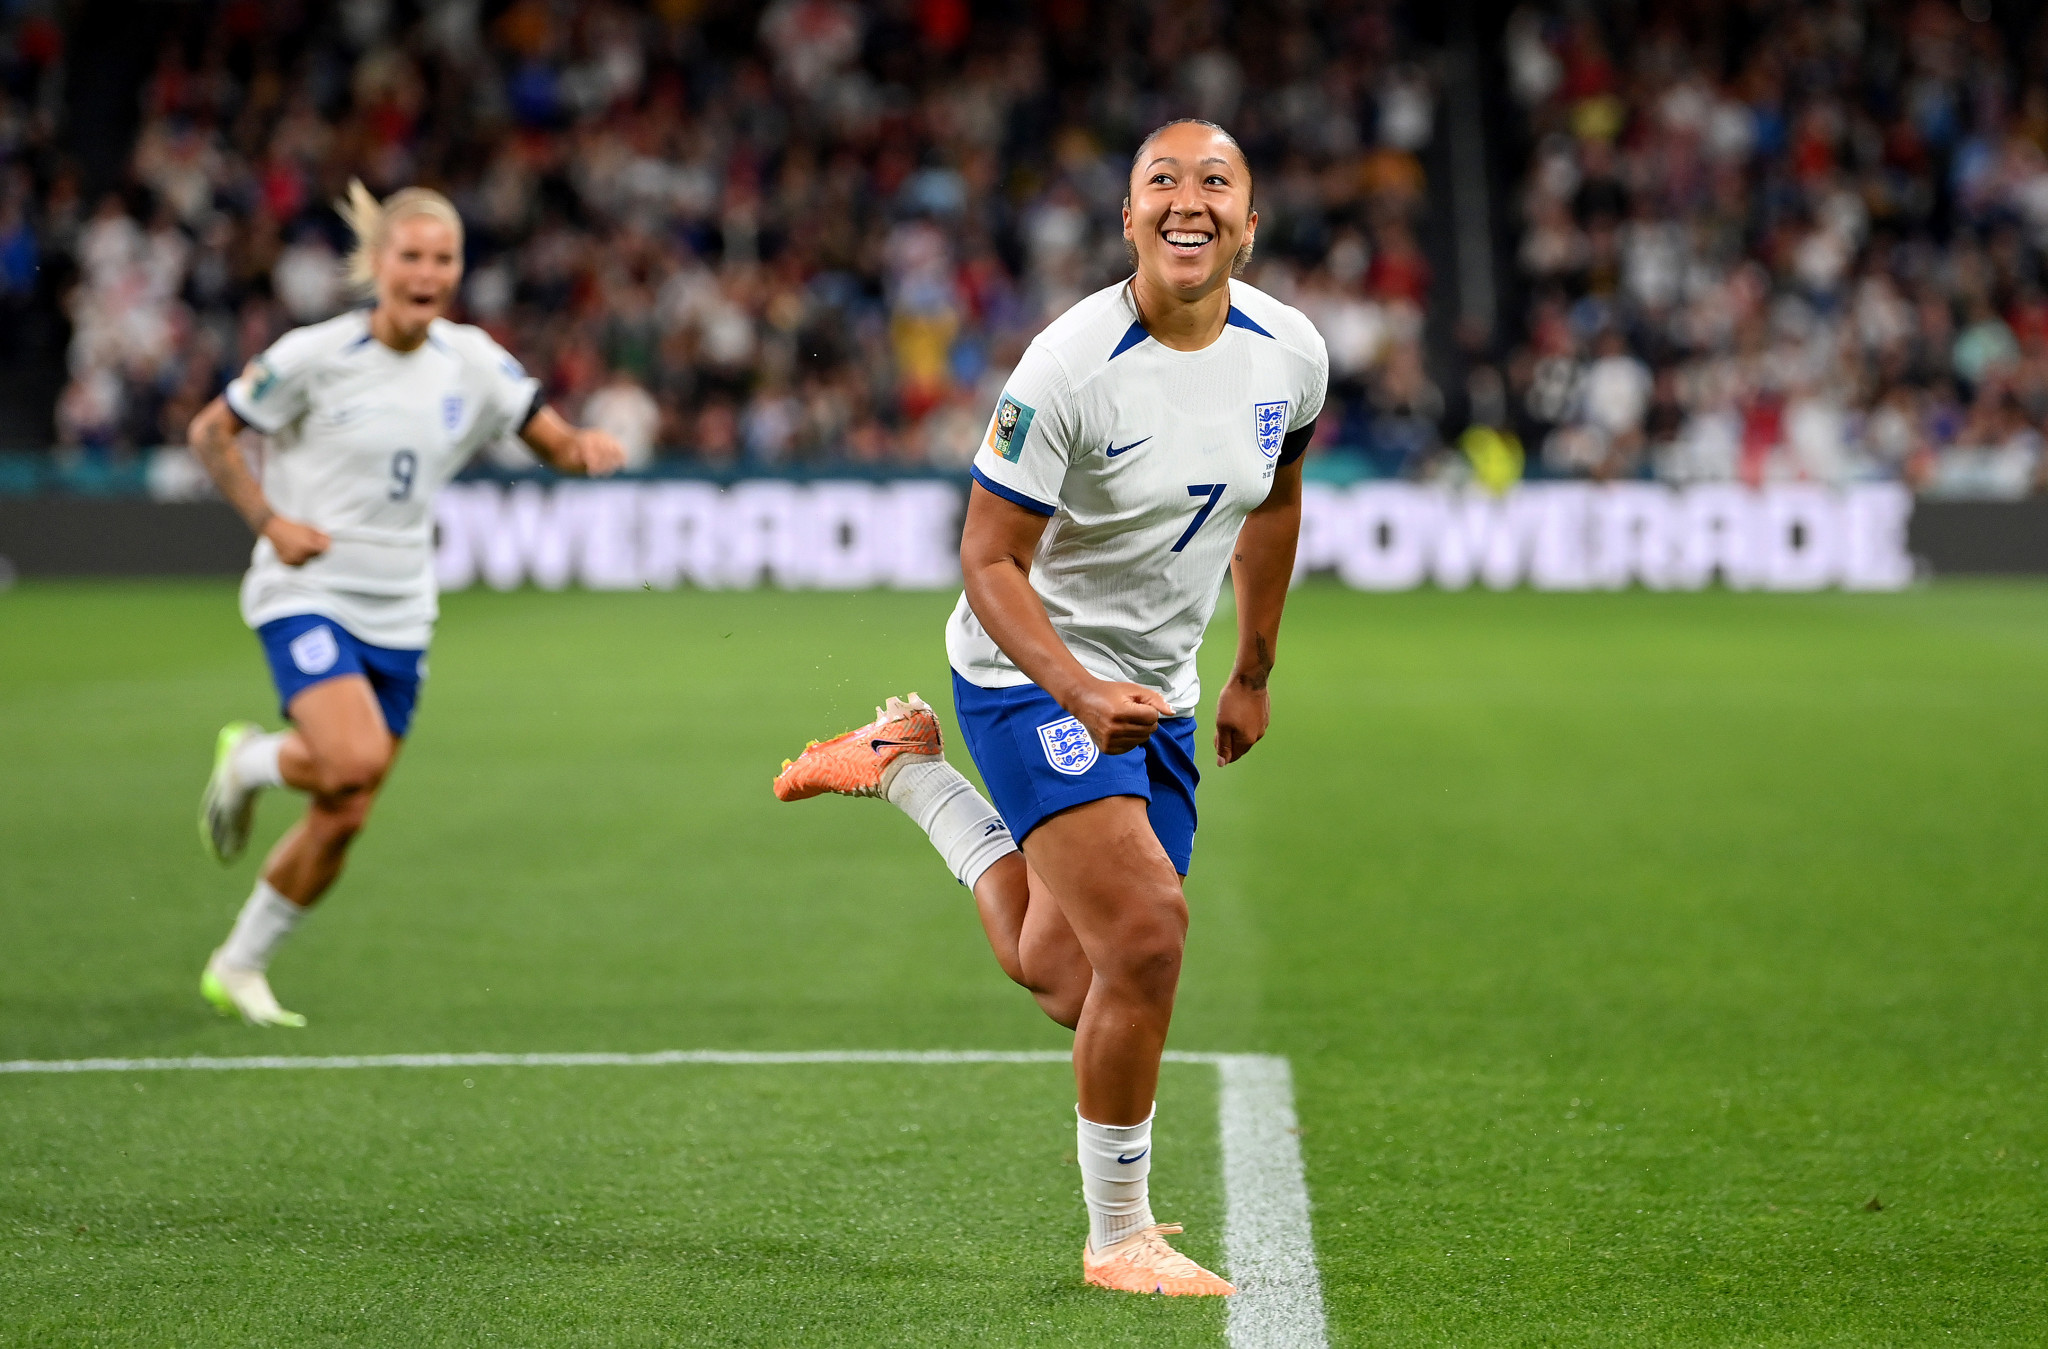 James scores stunner to guide England to victory at FIFA Women's World Cup